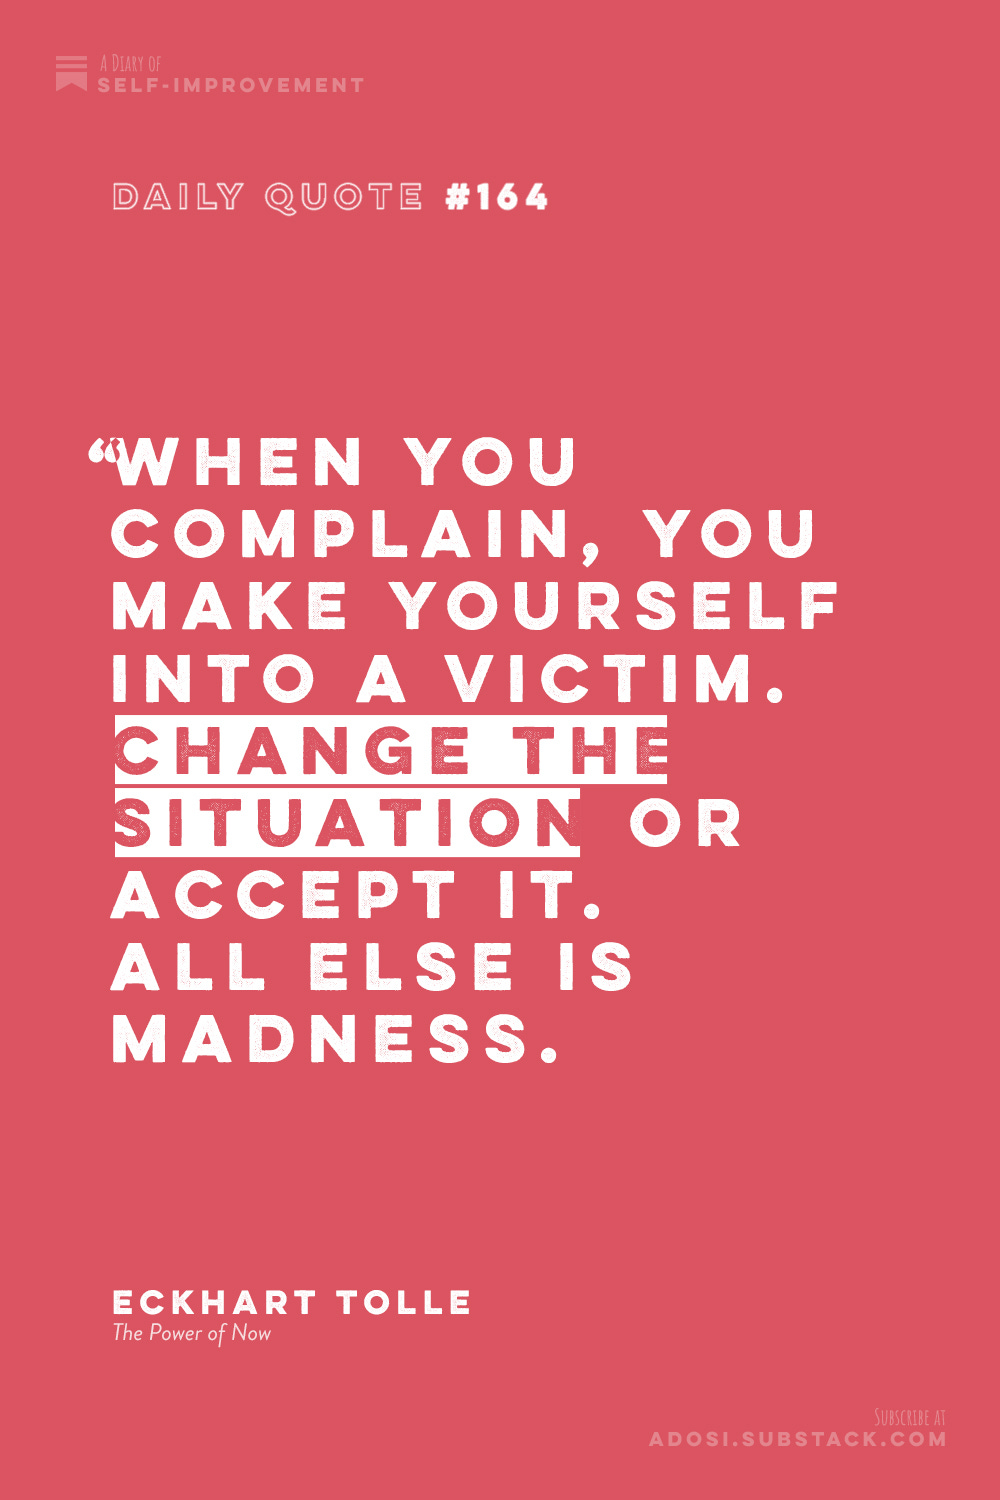 Daily Quote #164: "When you complain, you make yourself into a victim. Change the situation or accept it. All else is madness." Eckhart Tolle, The Power of Now